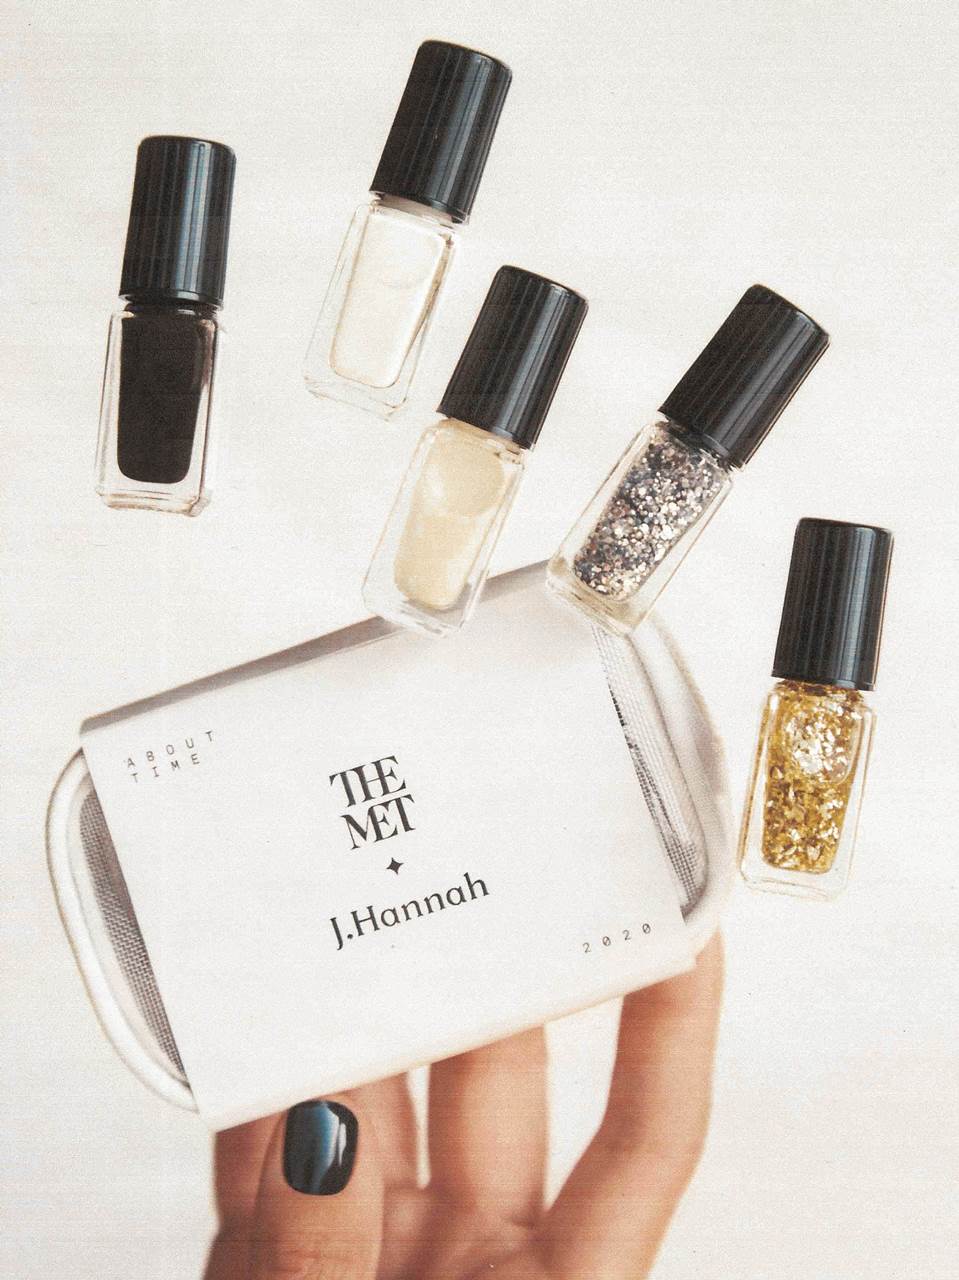 J. Hannah Nail Polish Kit, Created in Collaboration With the Met